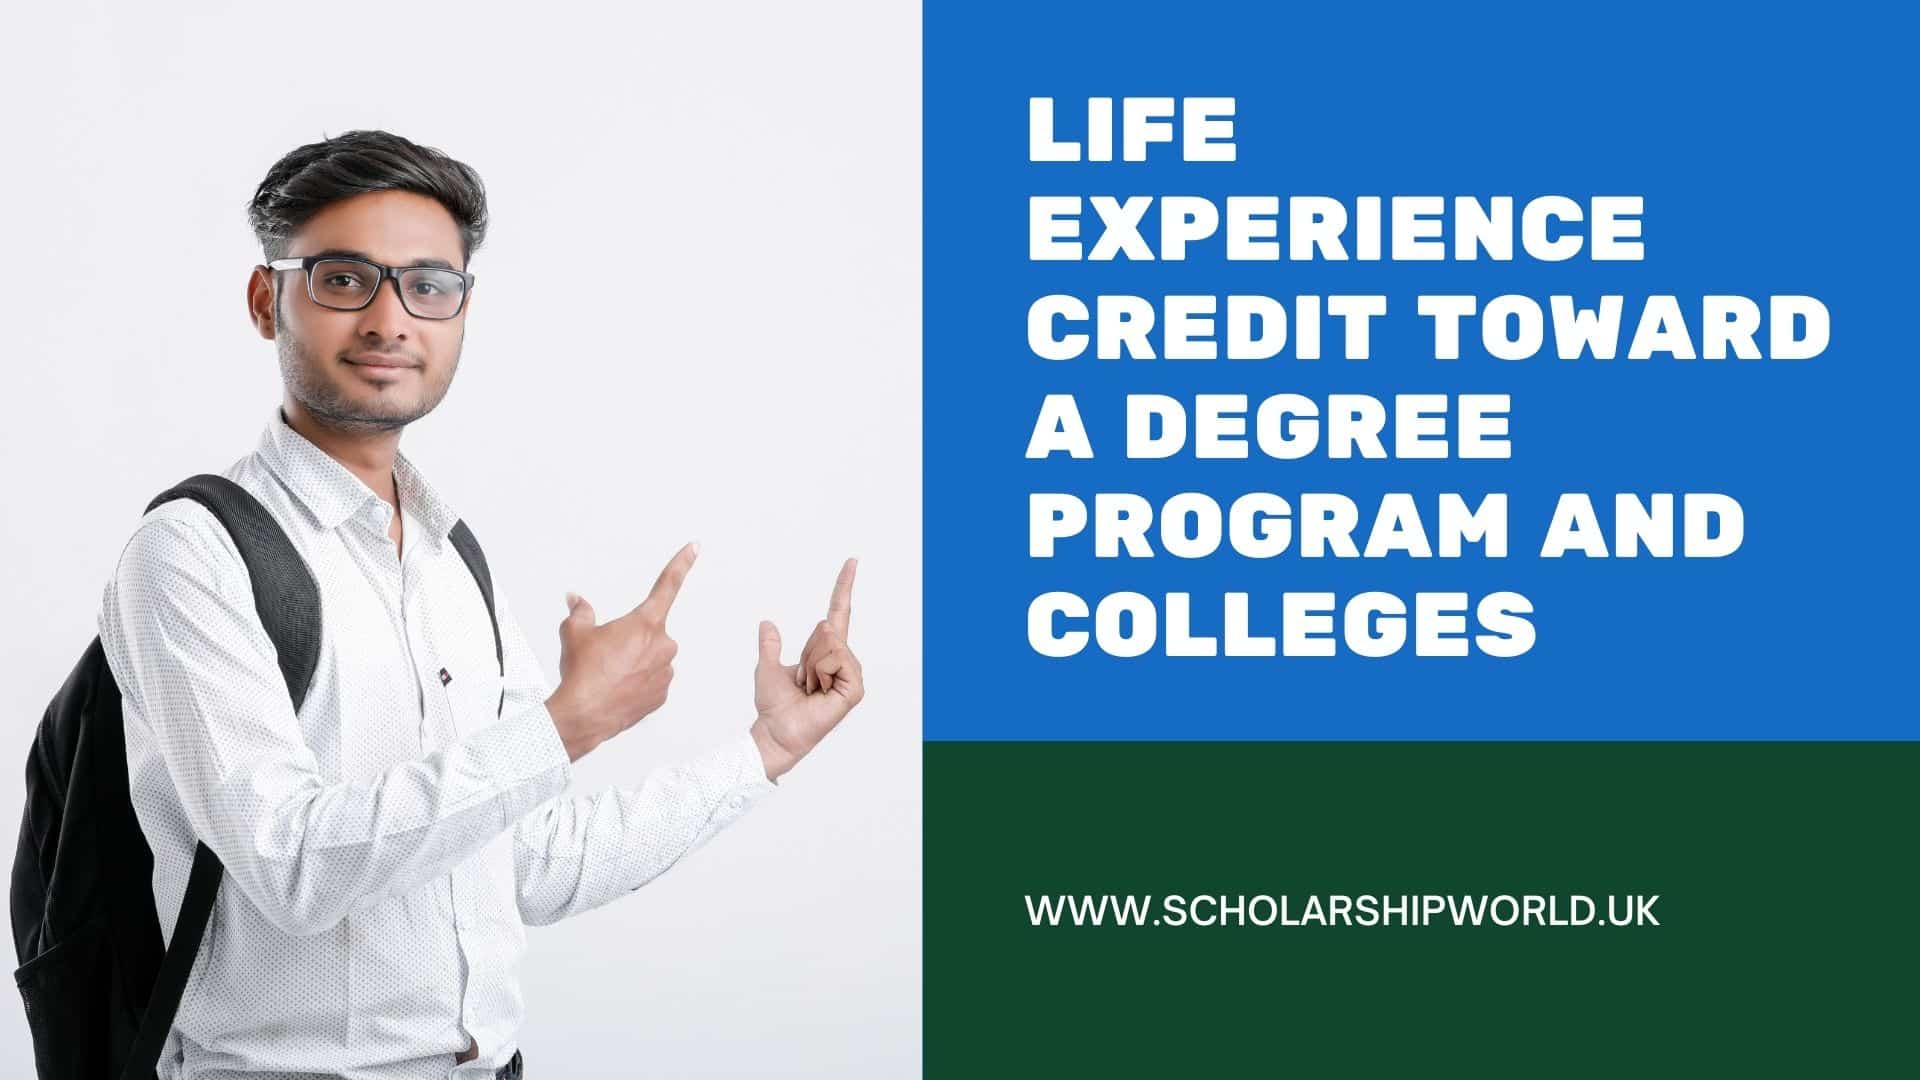 Life Experience Credit Toward a Degree Program and Colleges